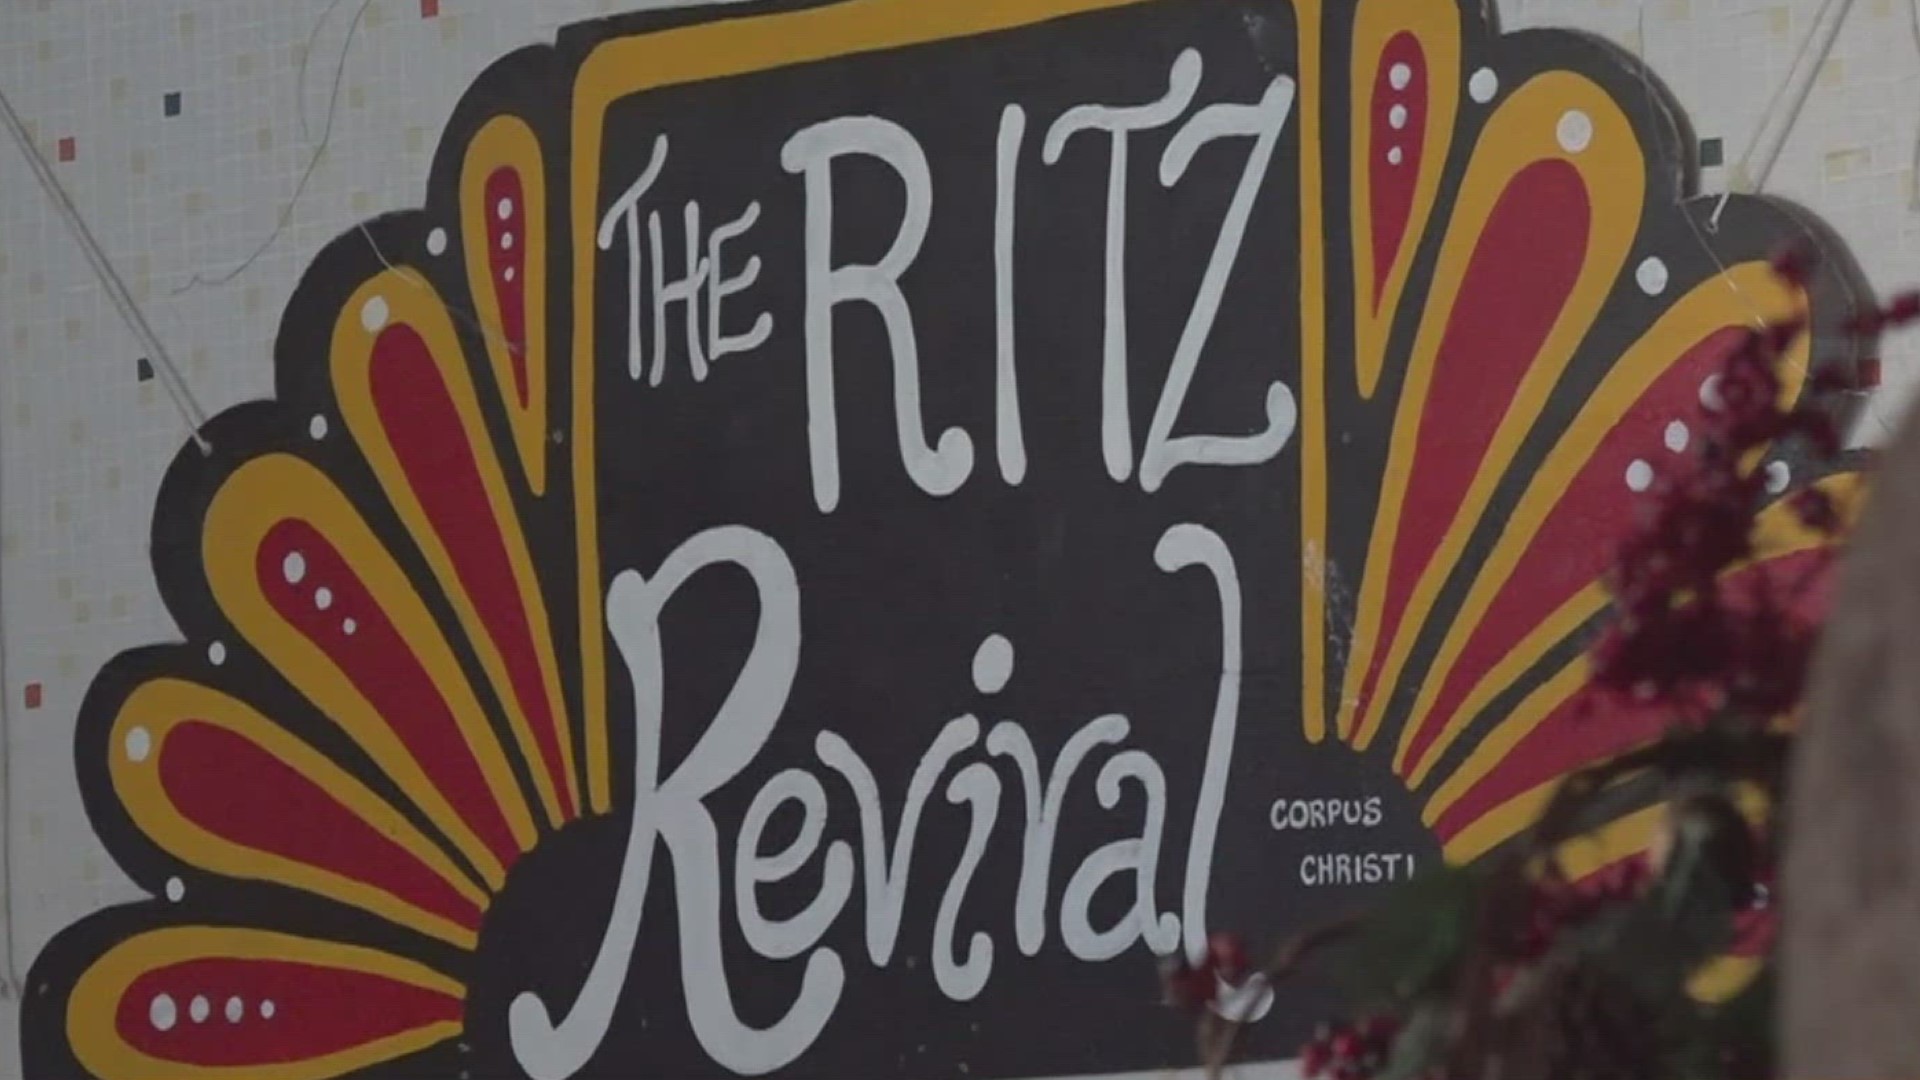 OTJ Architects have worked on dozens of buildings like The Ritz, including the Plaza Theatre in El Paso.